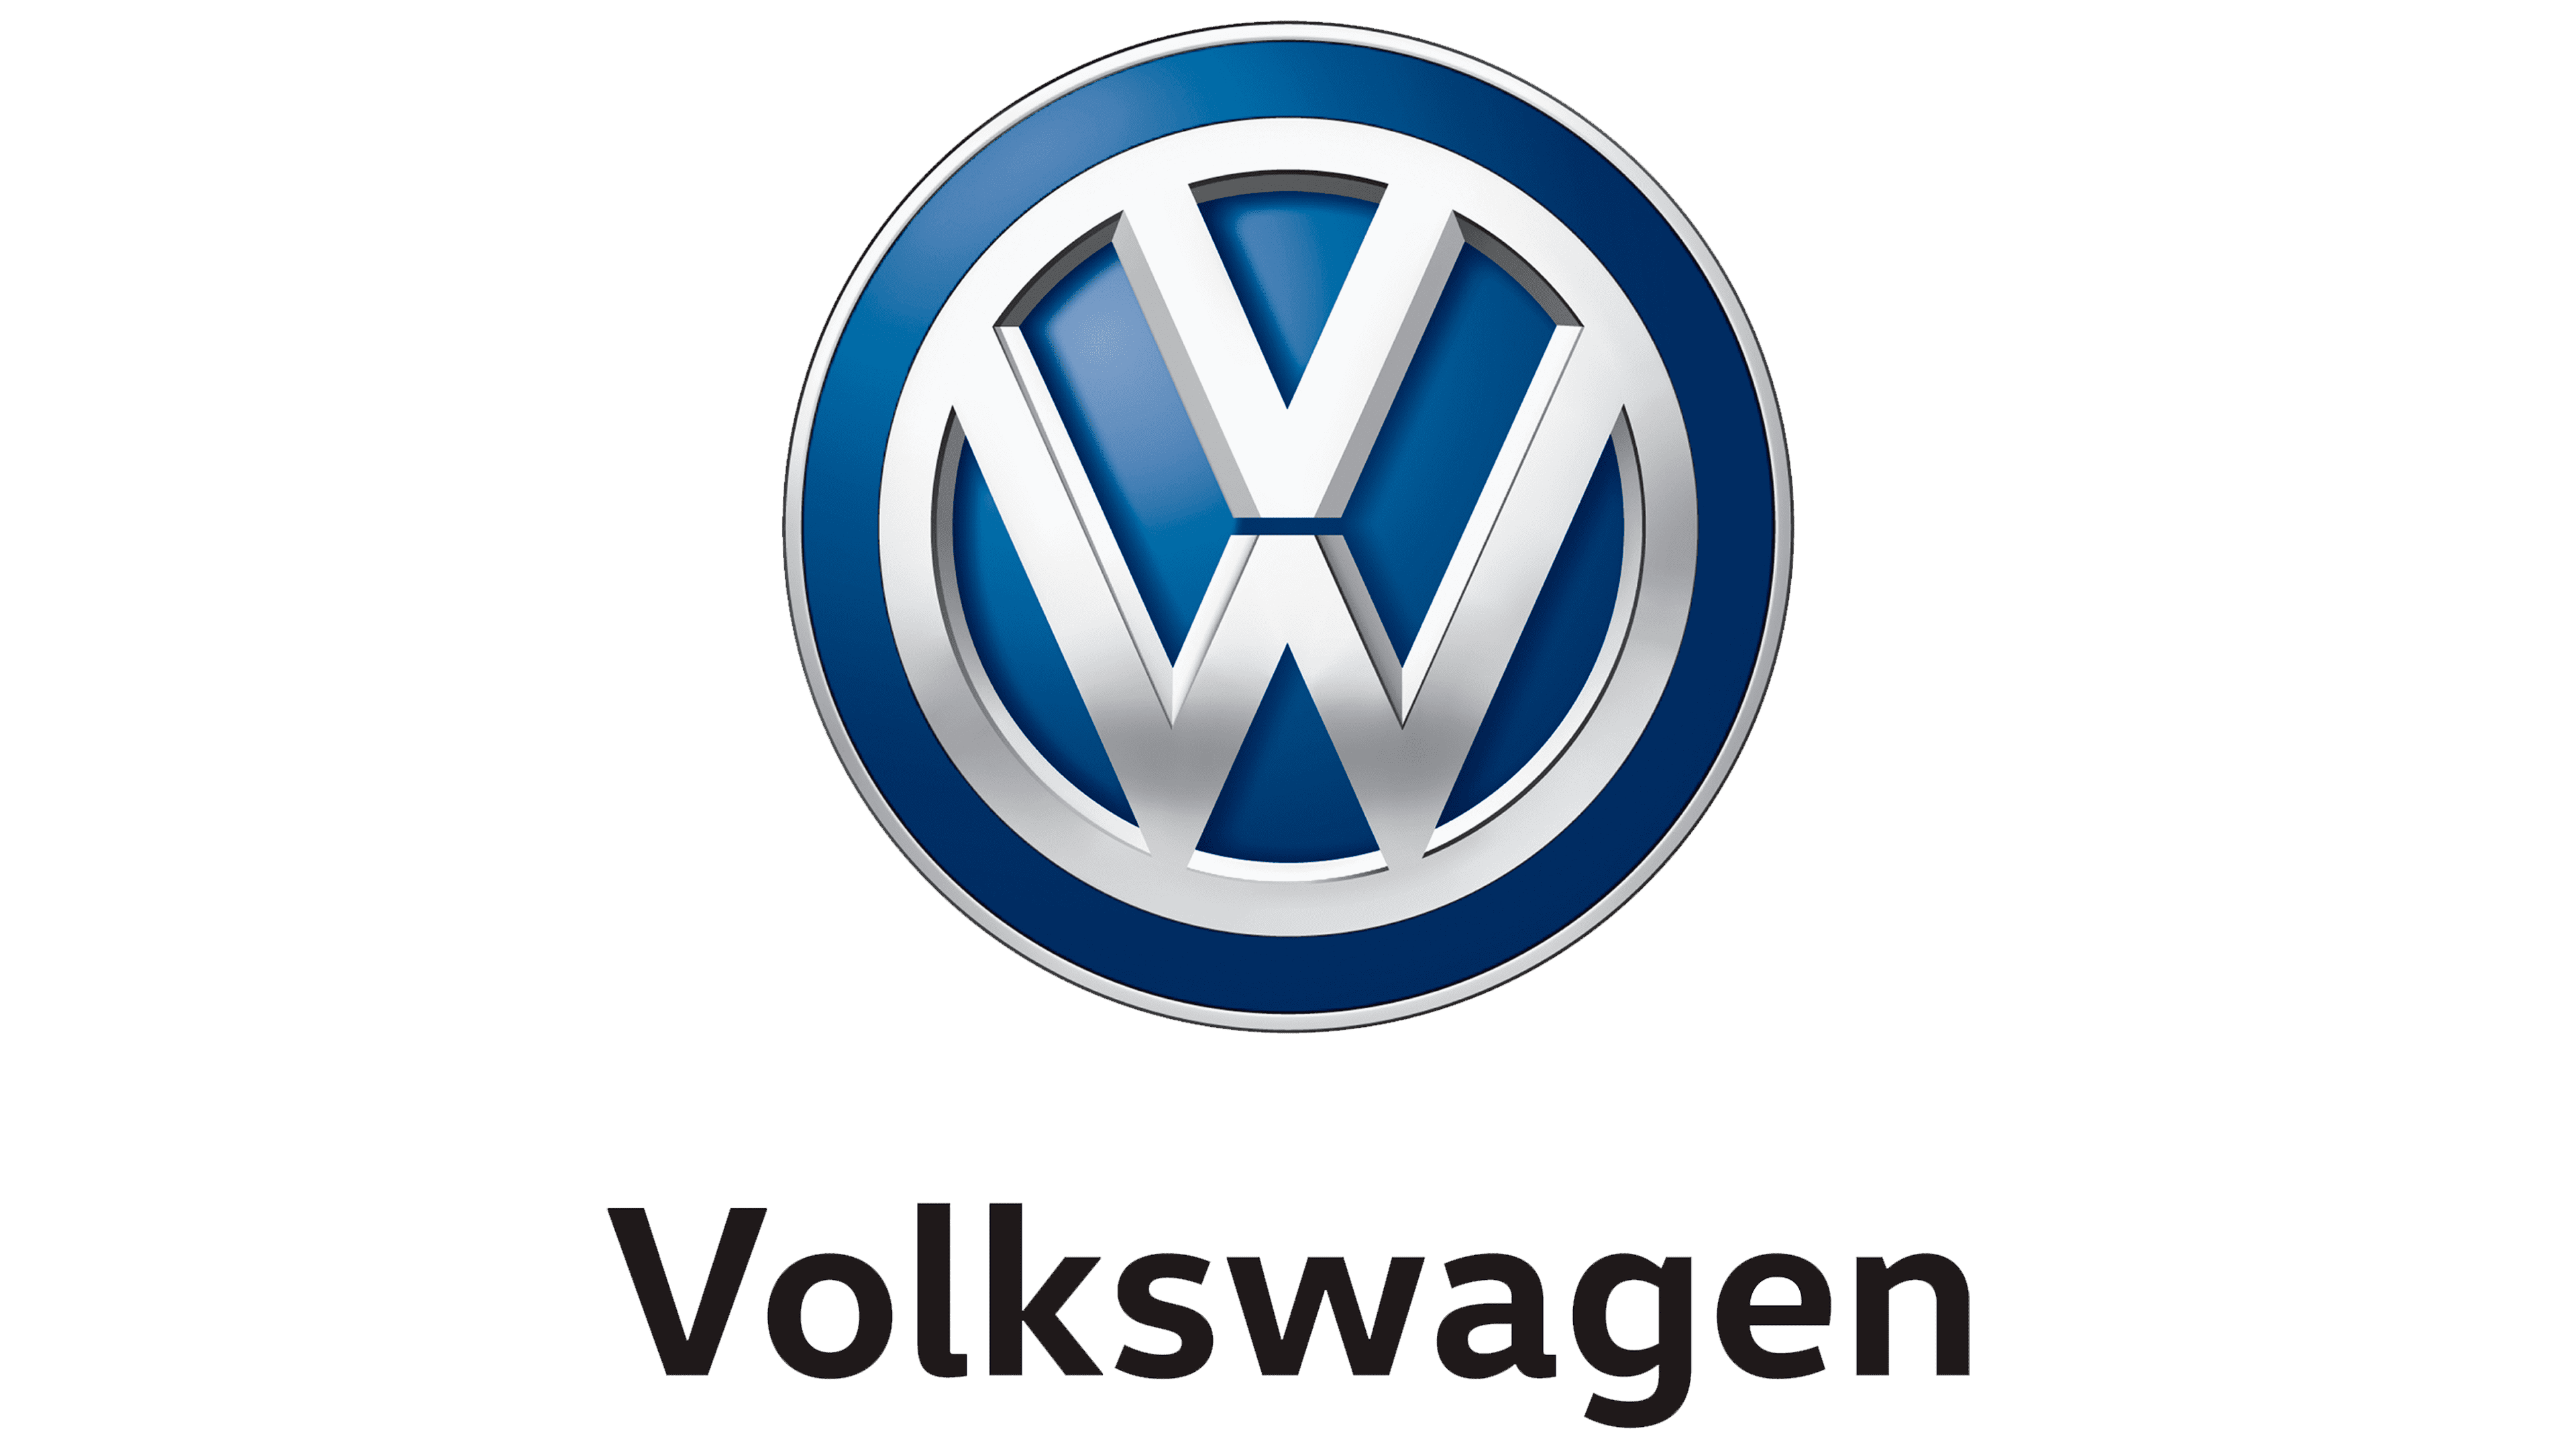 Volkswagen Group: A Leader Among the Top Car Manufacturing Companies in the World